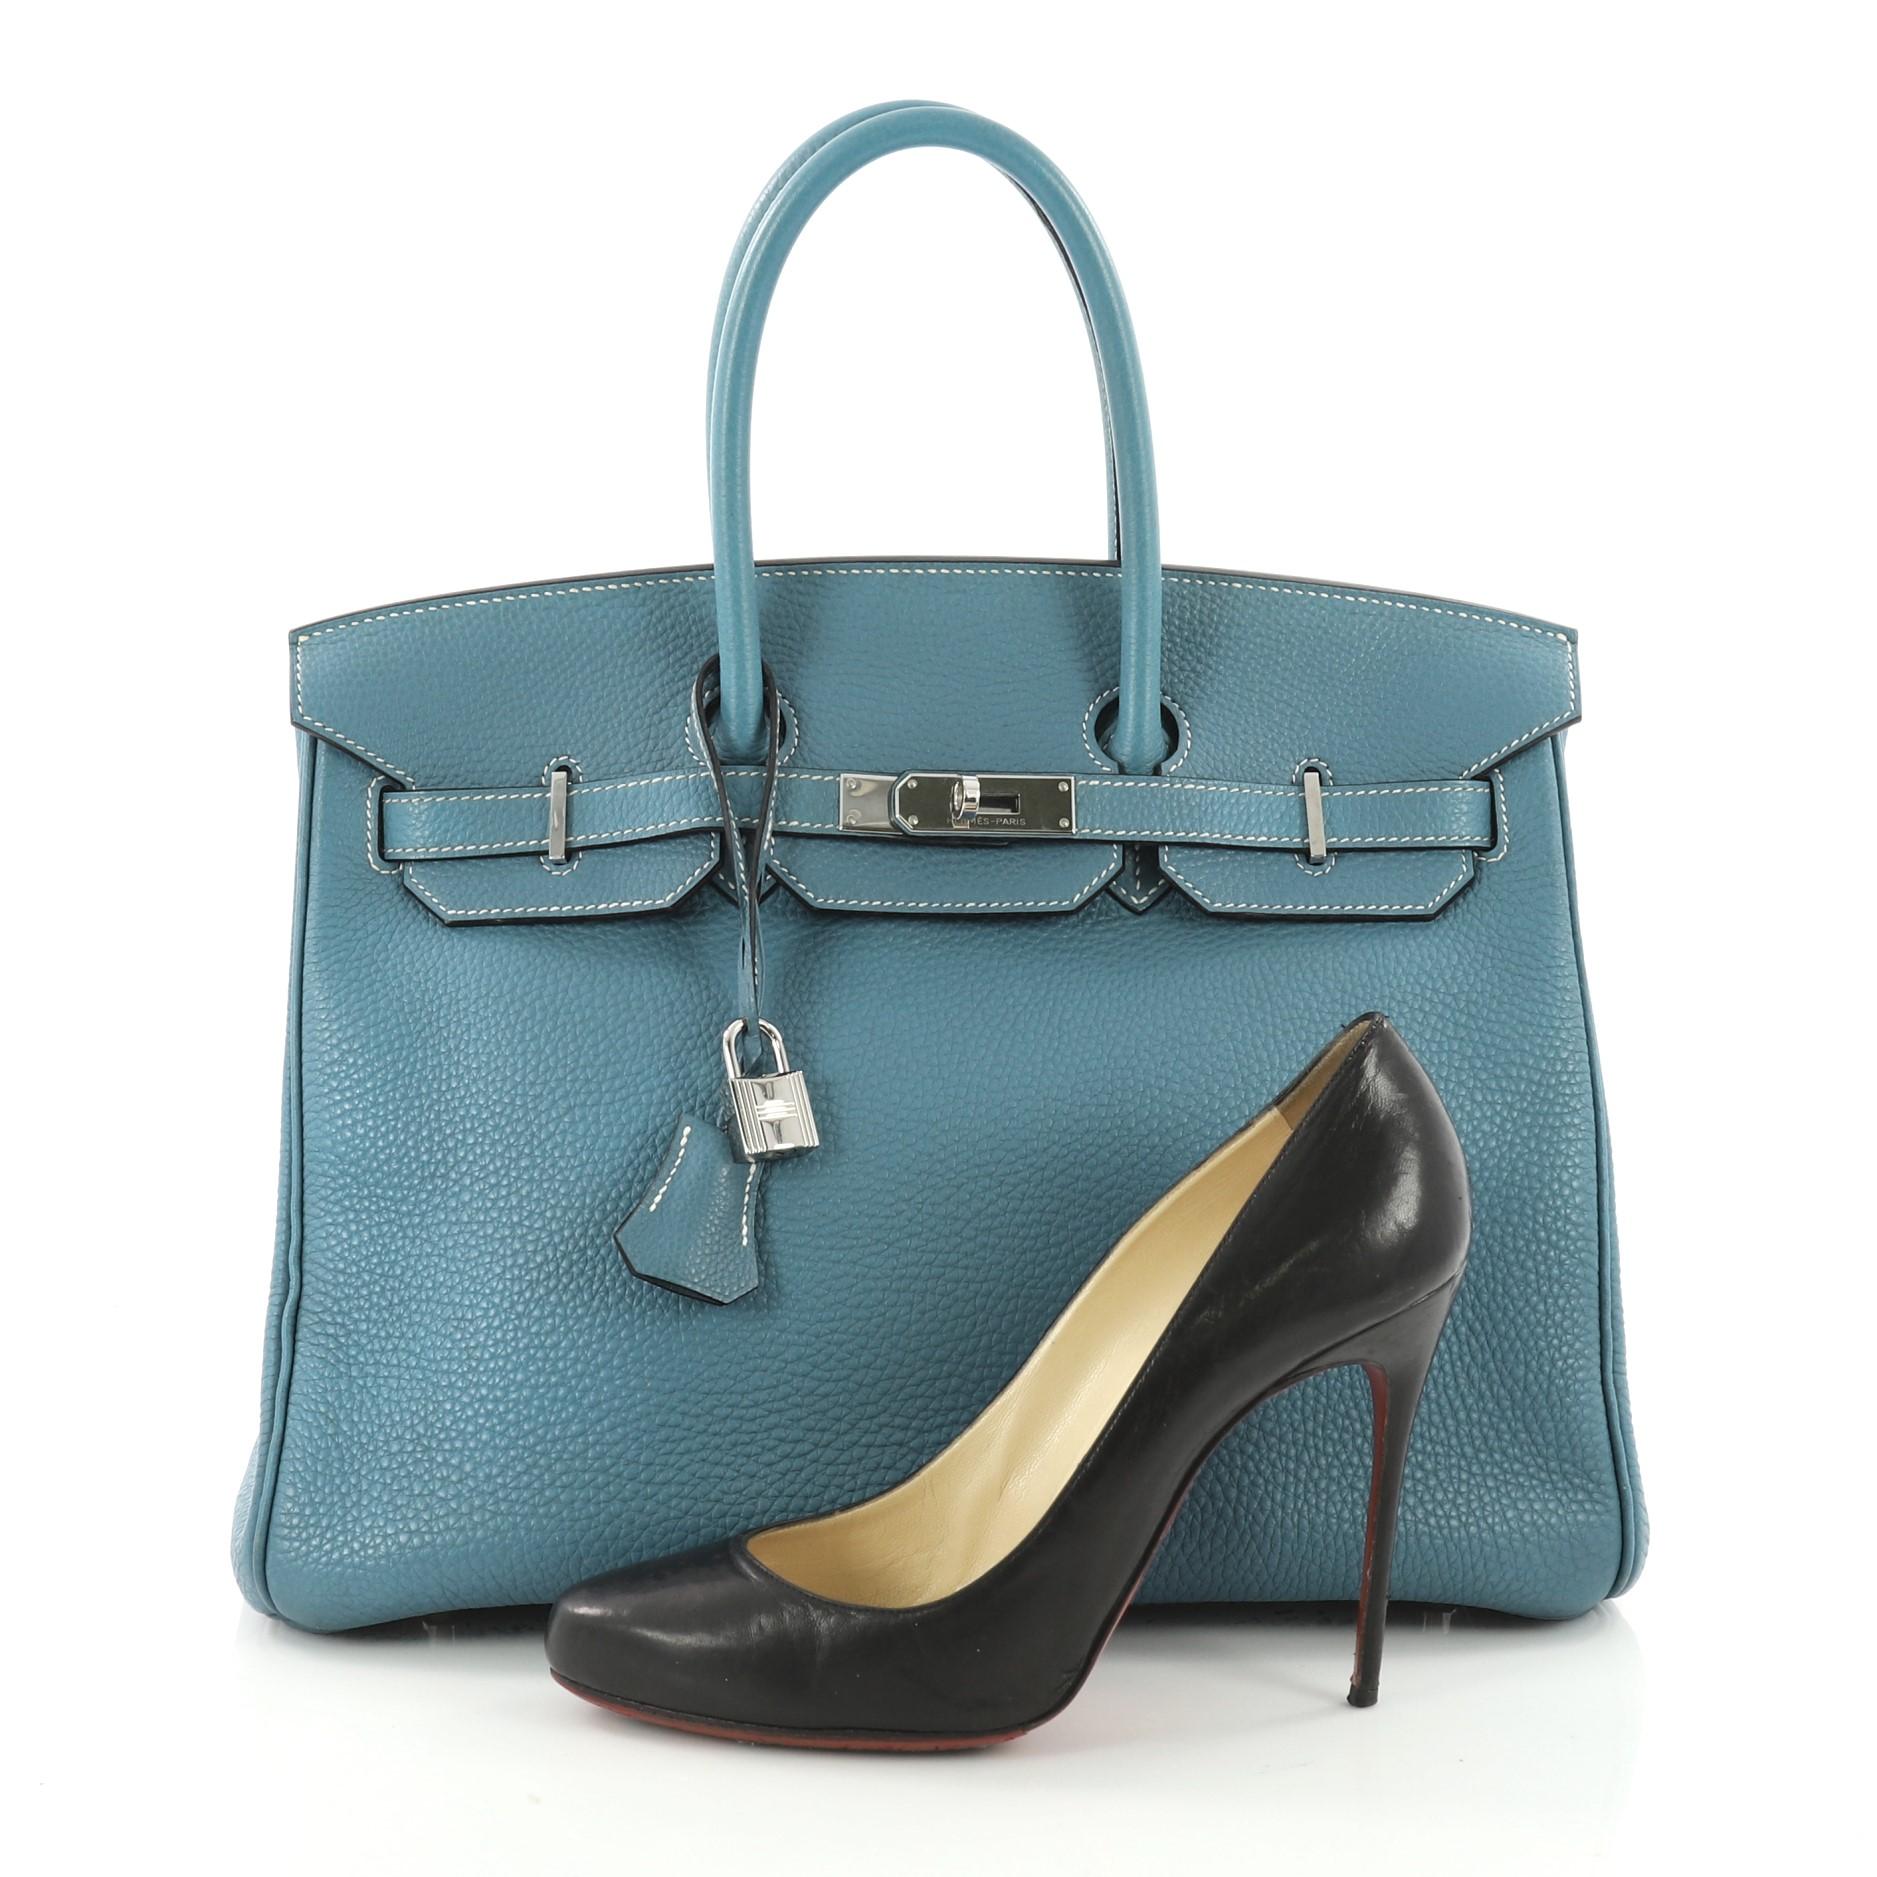 This authentic Hermes Birkin Handbag Blue Jean Togo with Palladium Hardware 35 stands as one of the most-coveted bags. Constructed from scratch-resistant Blue Jean togo leather, this stand-out tote features dual-rolled top handles, frontal flap,